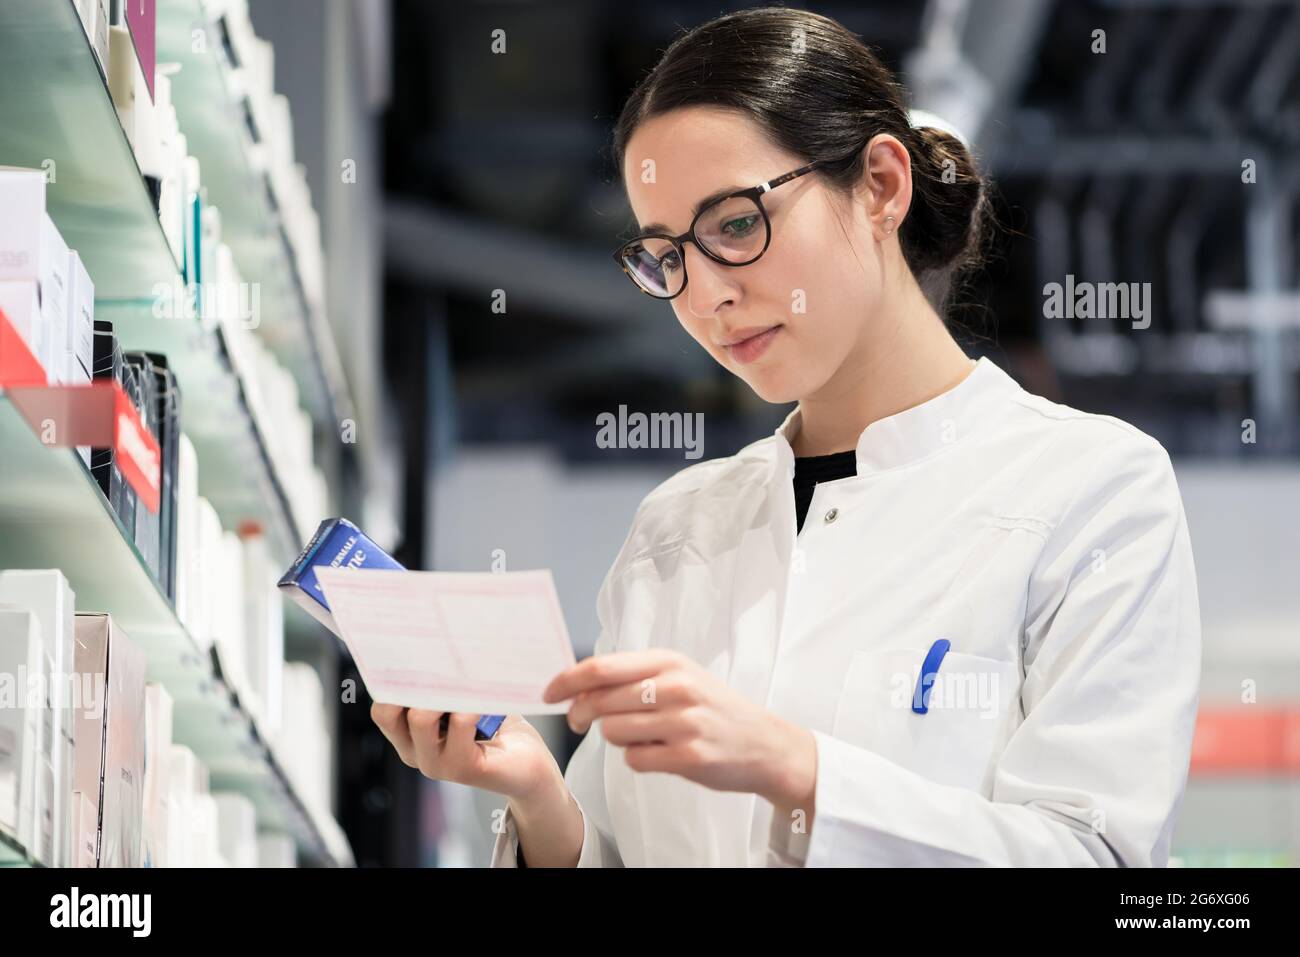 Low-angle portrait of an experienced female pharmacist checking the medical prescription of a pharmaceutical drug, while working in the interior of a Stock Photo